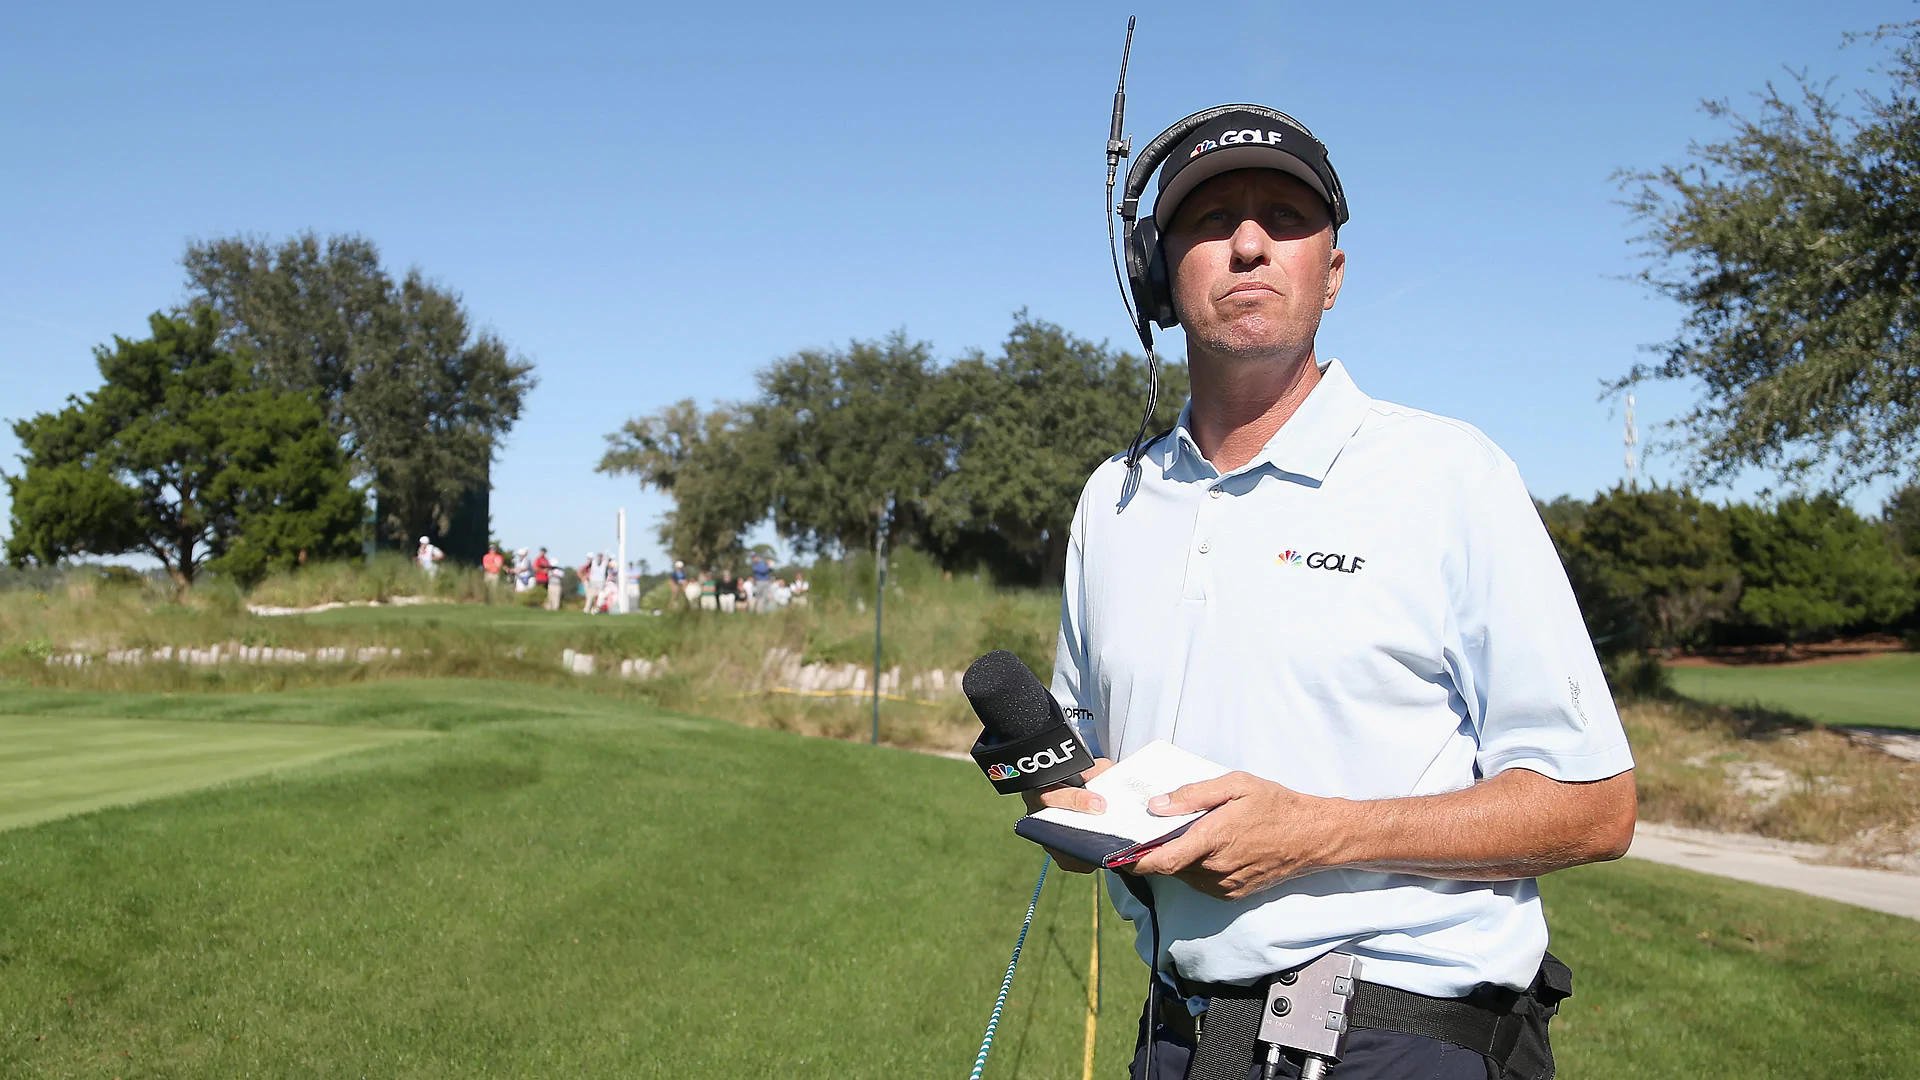 Mackay joins Golf Channel as on-course reporter